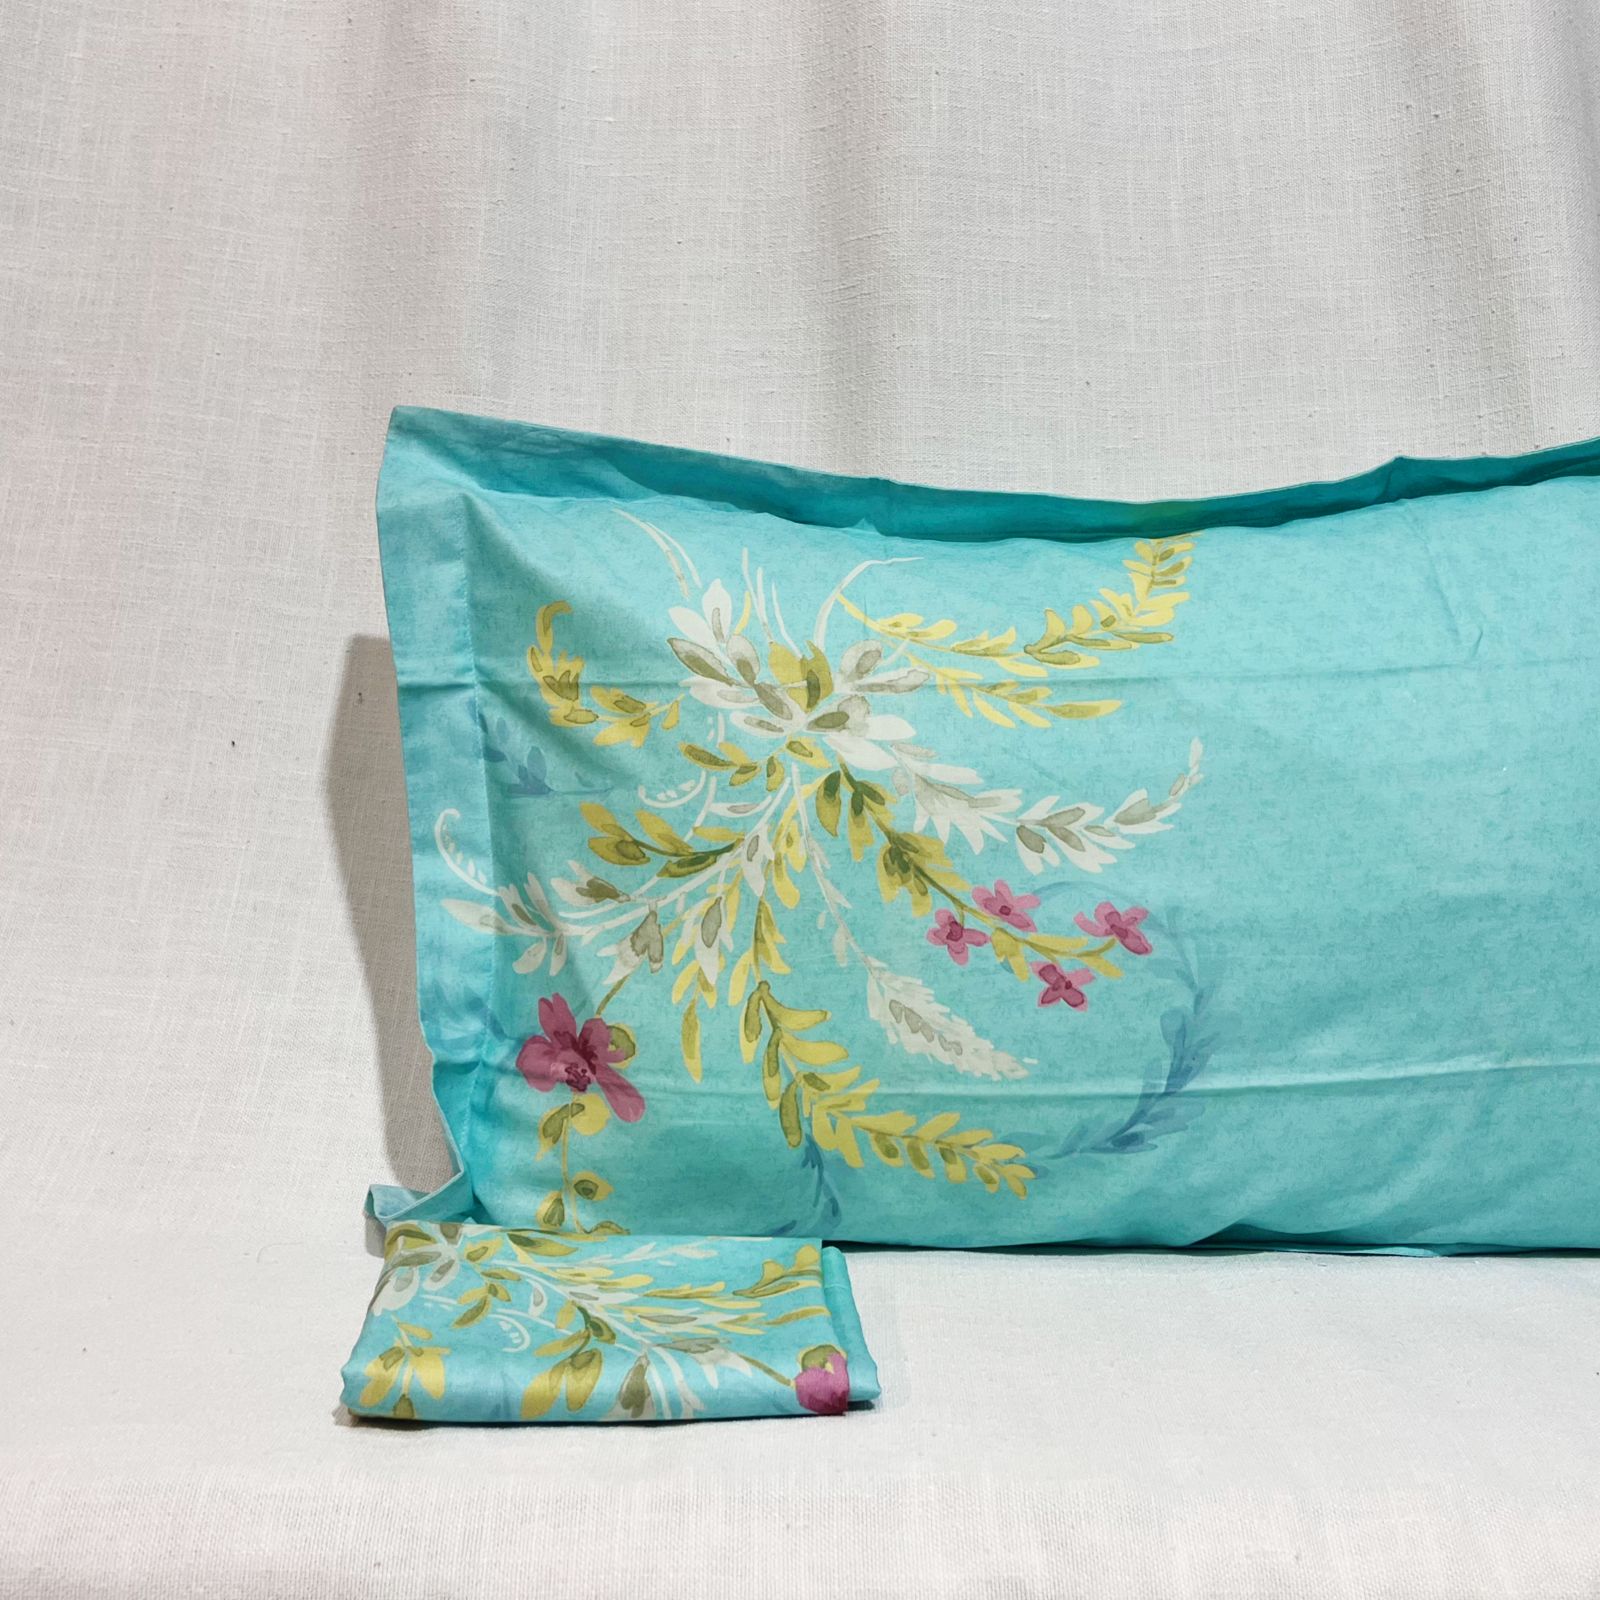 Pillow Cover with size of 43cm x 68cm (17" x 27")